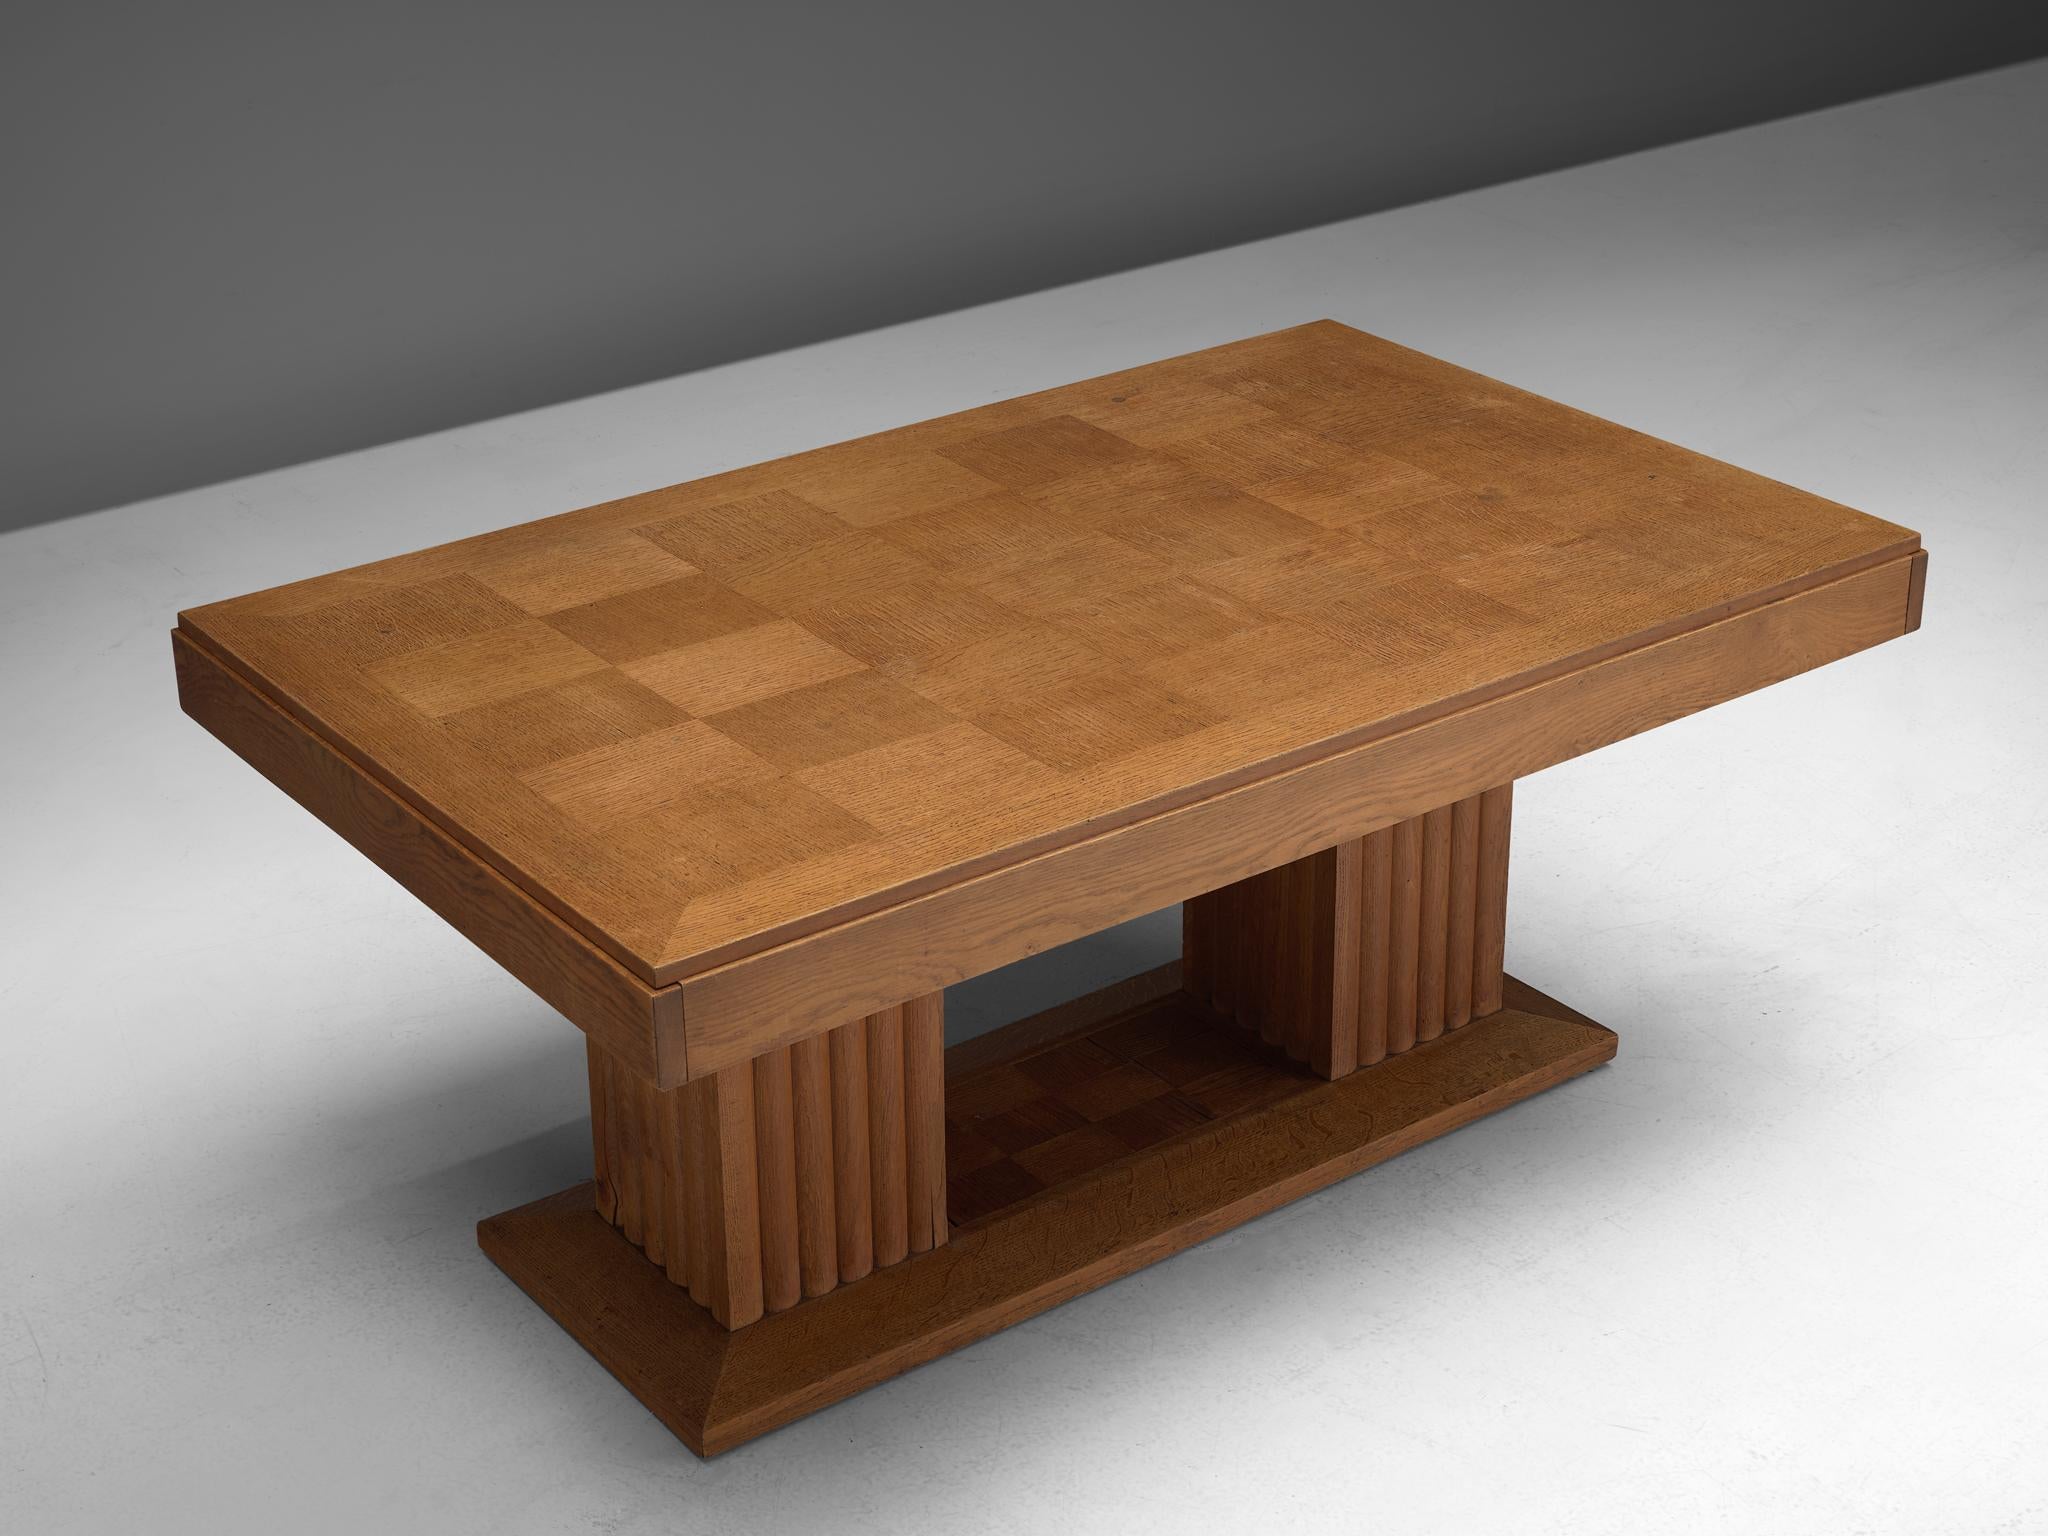 French Christian Krass Table with Inlayed Top, 1930s